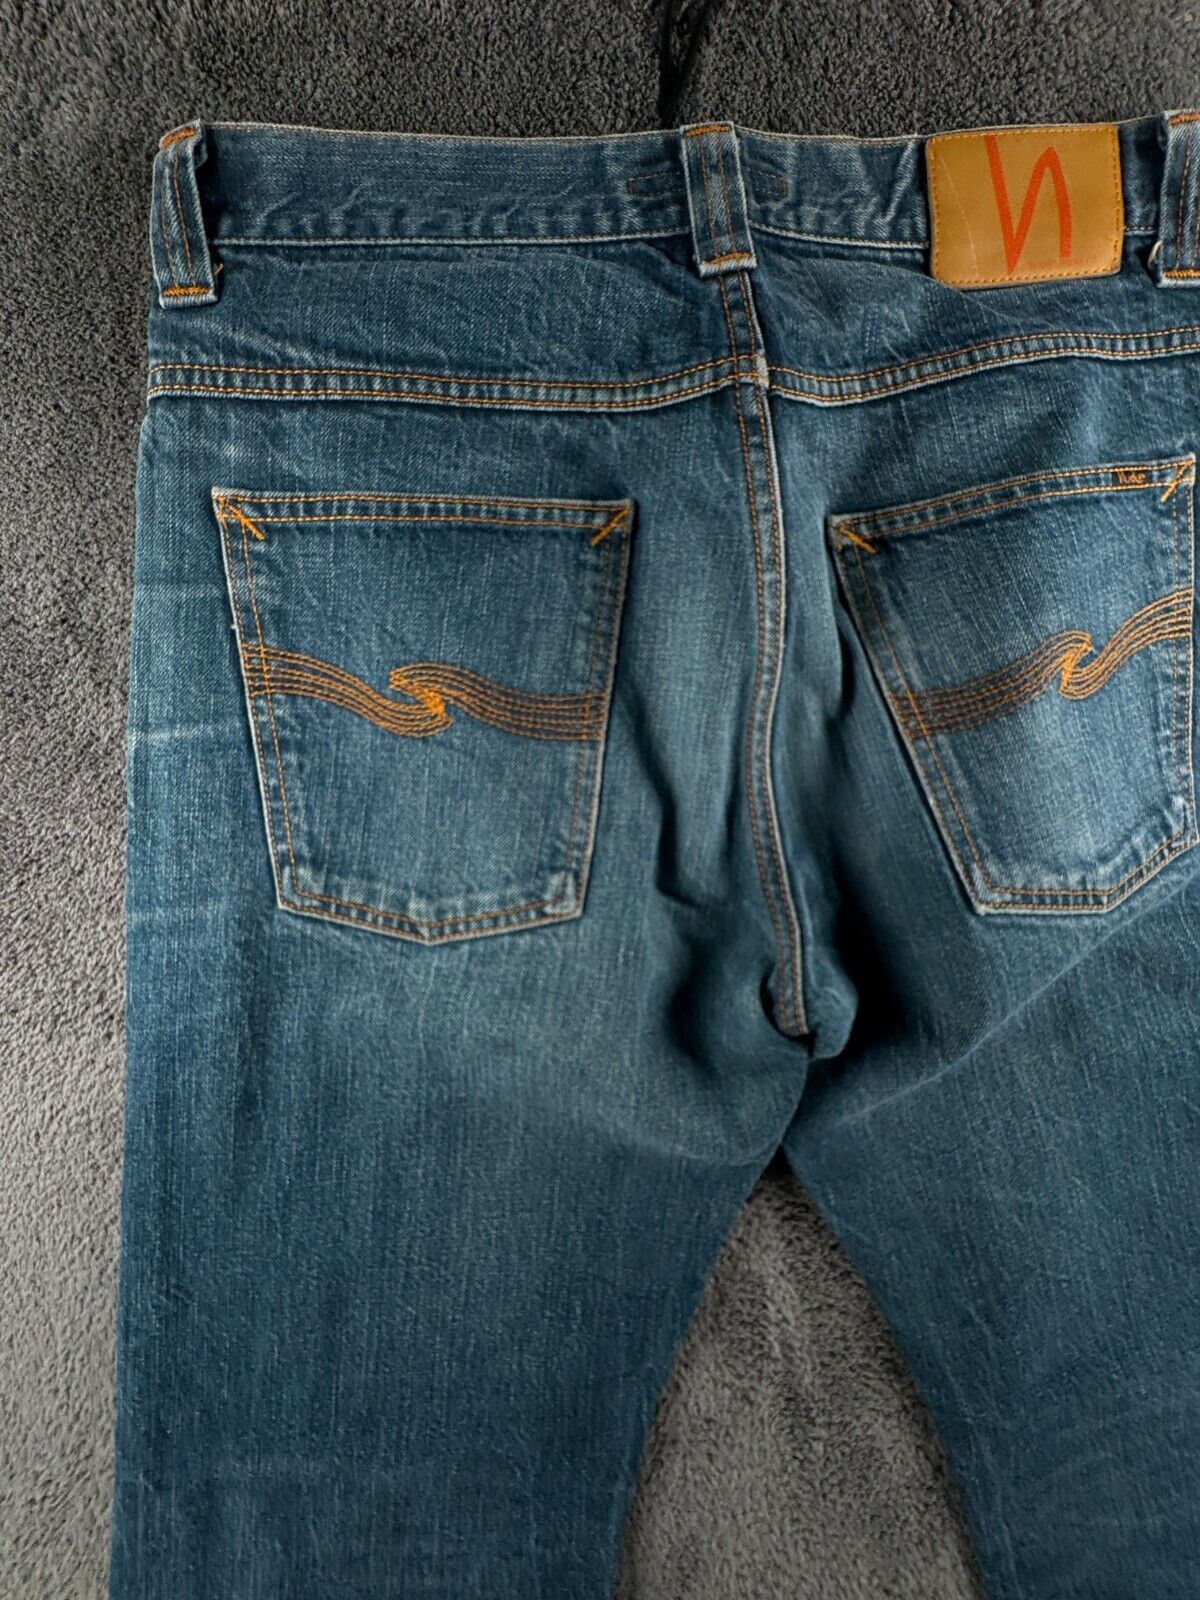 Nudie Jeans Co Italy Made Jean Denim Pants Size 3… - image 16